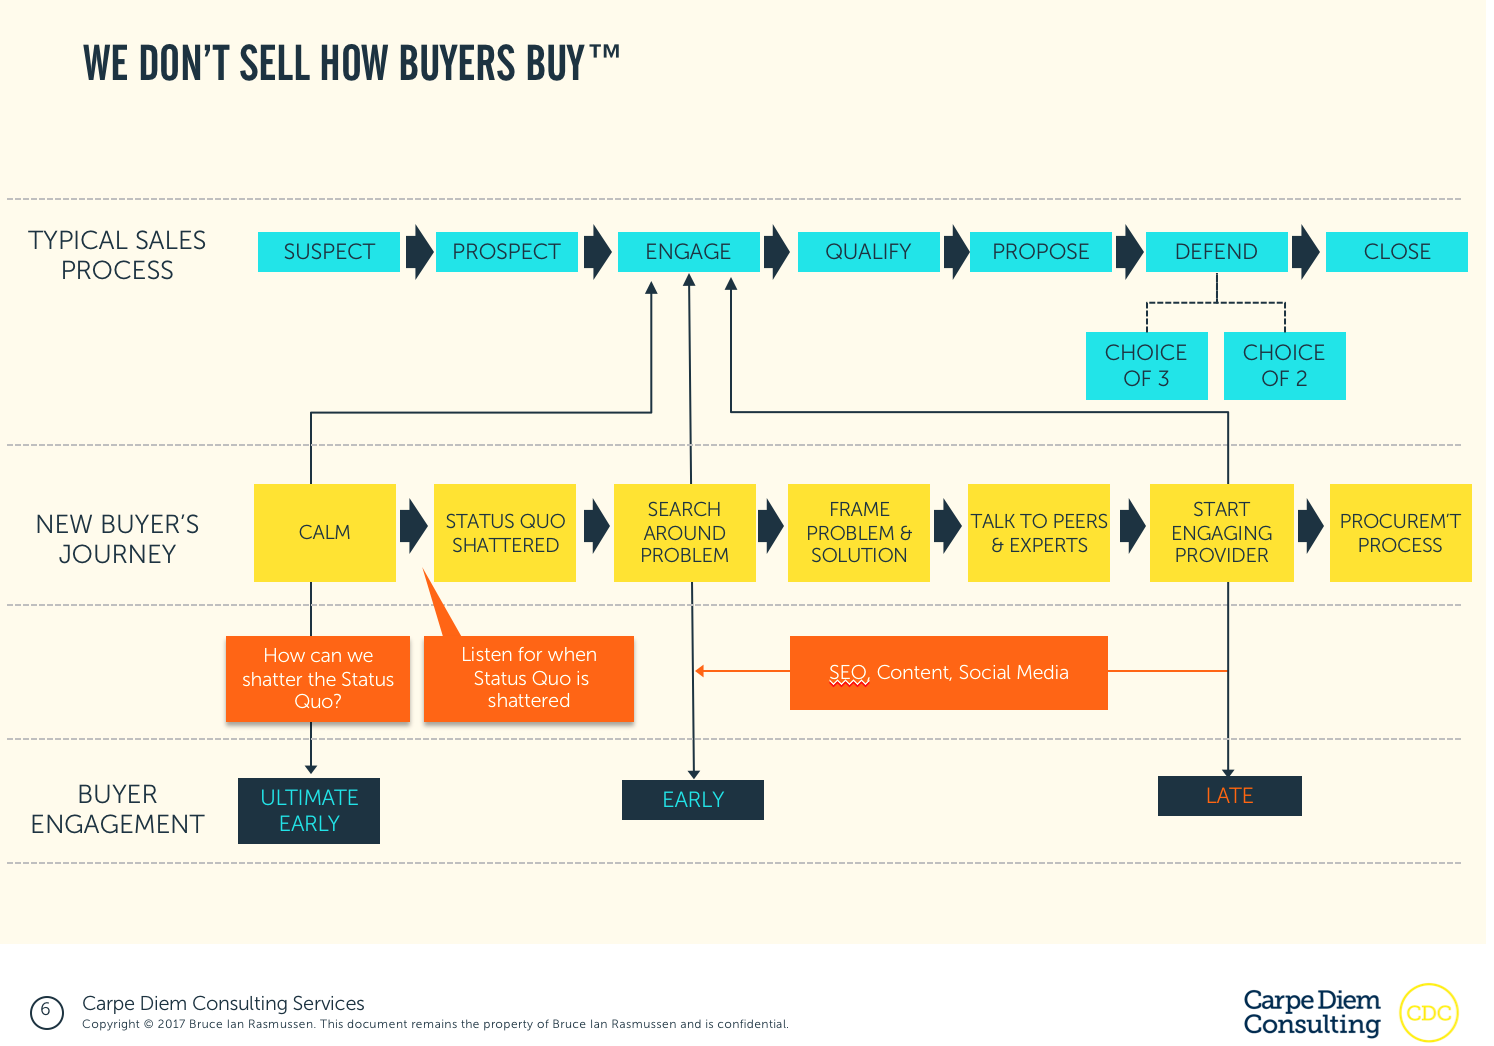 We don't sell how buyers buy